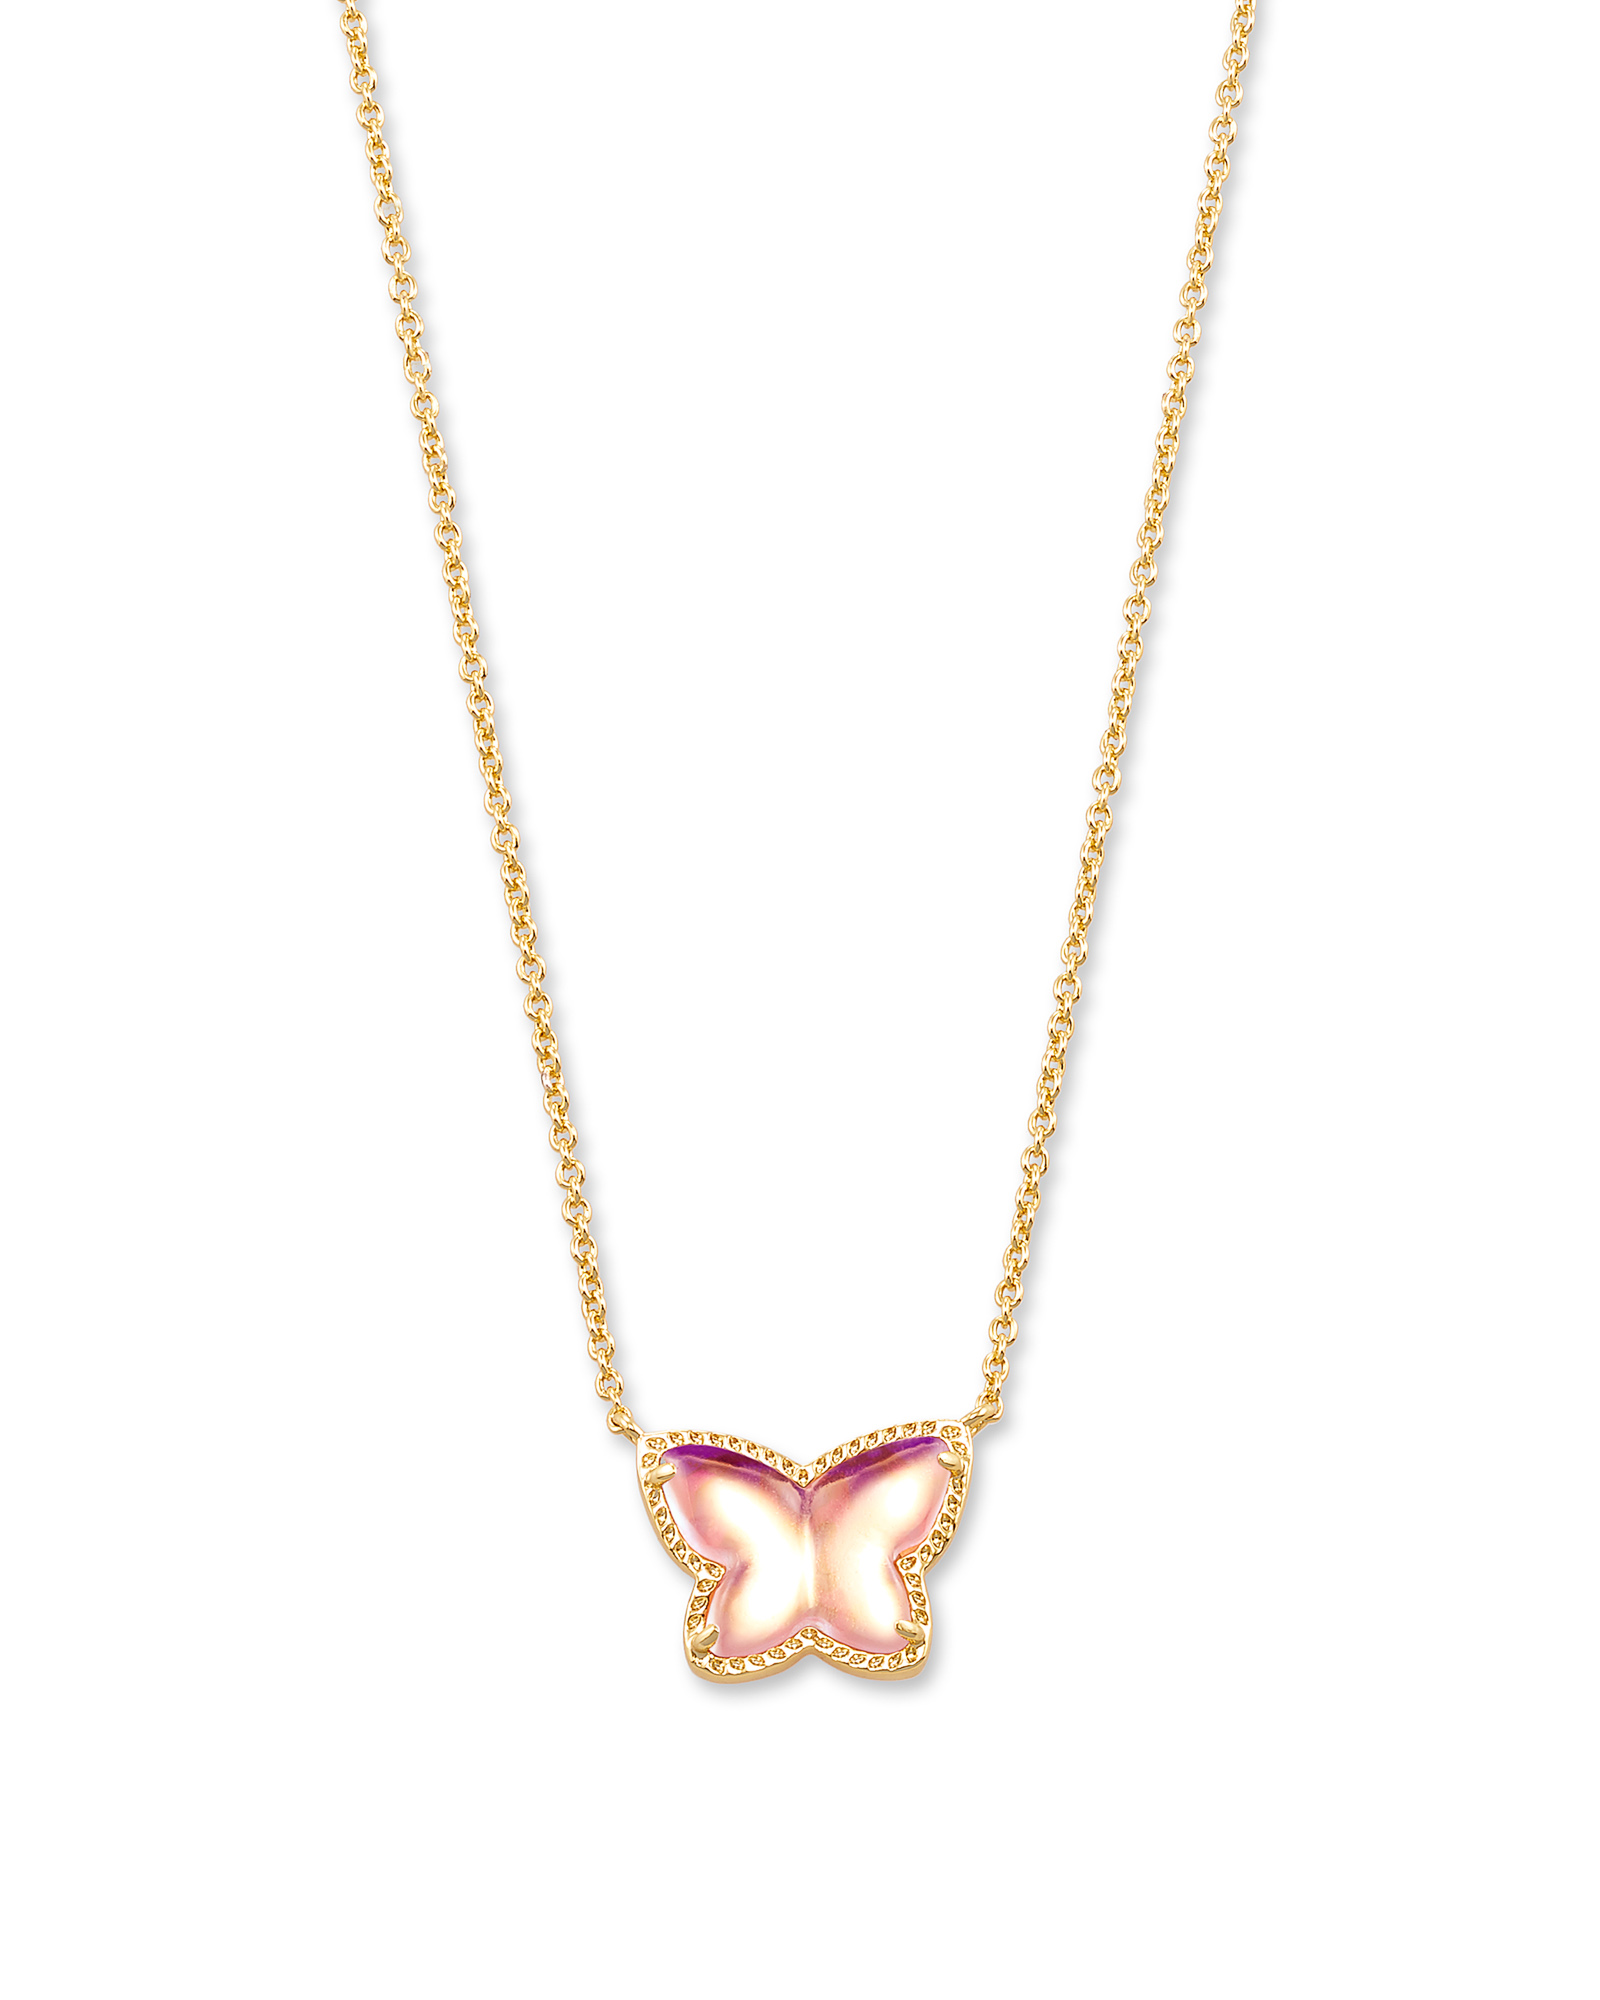 New Kendra Scott Lillia Butterfly Pendant Necklace ​in Dichroic / Gold |  eBay